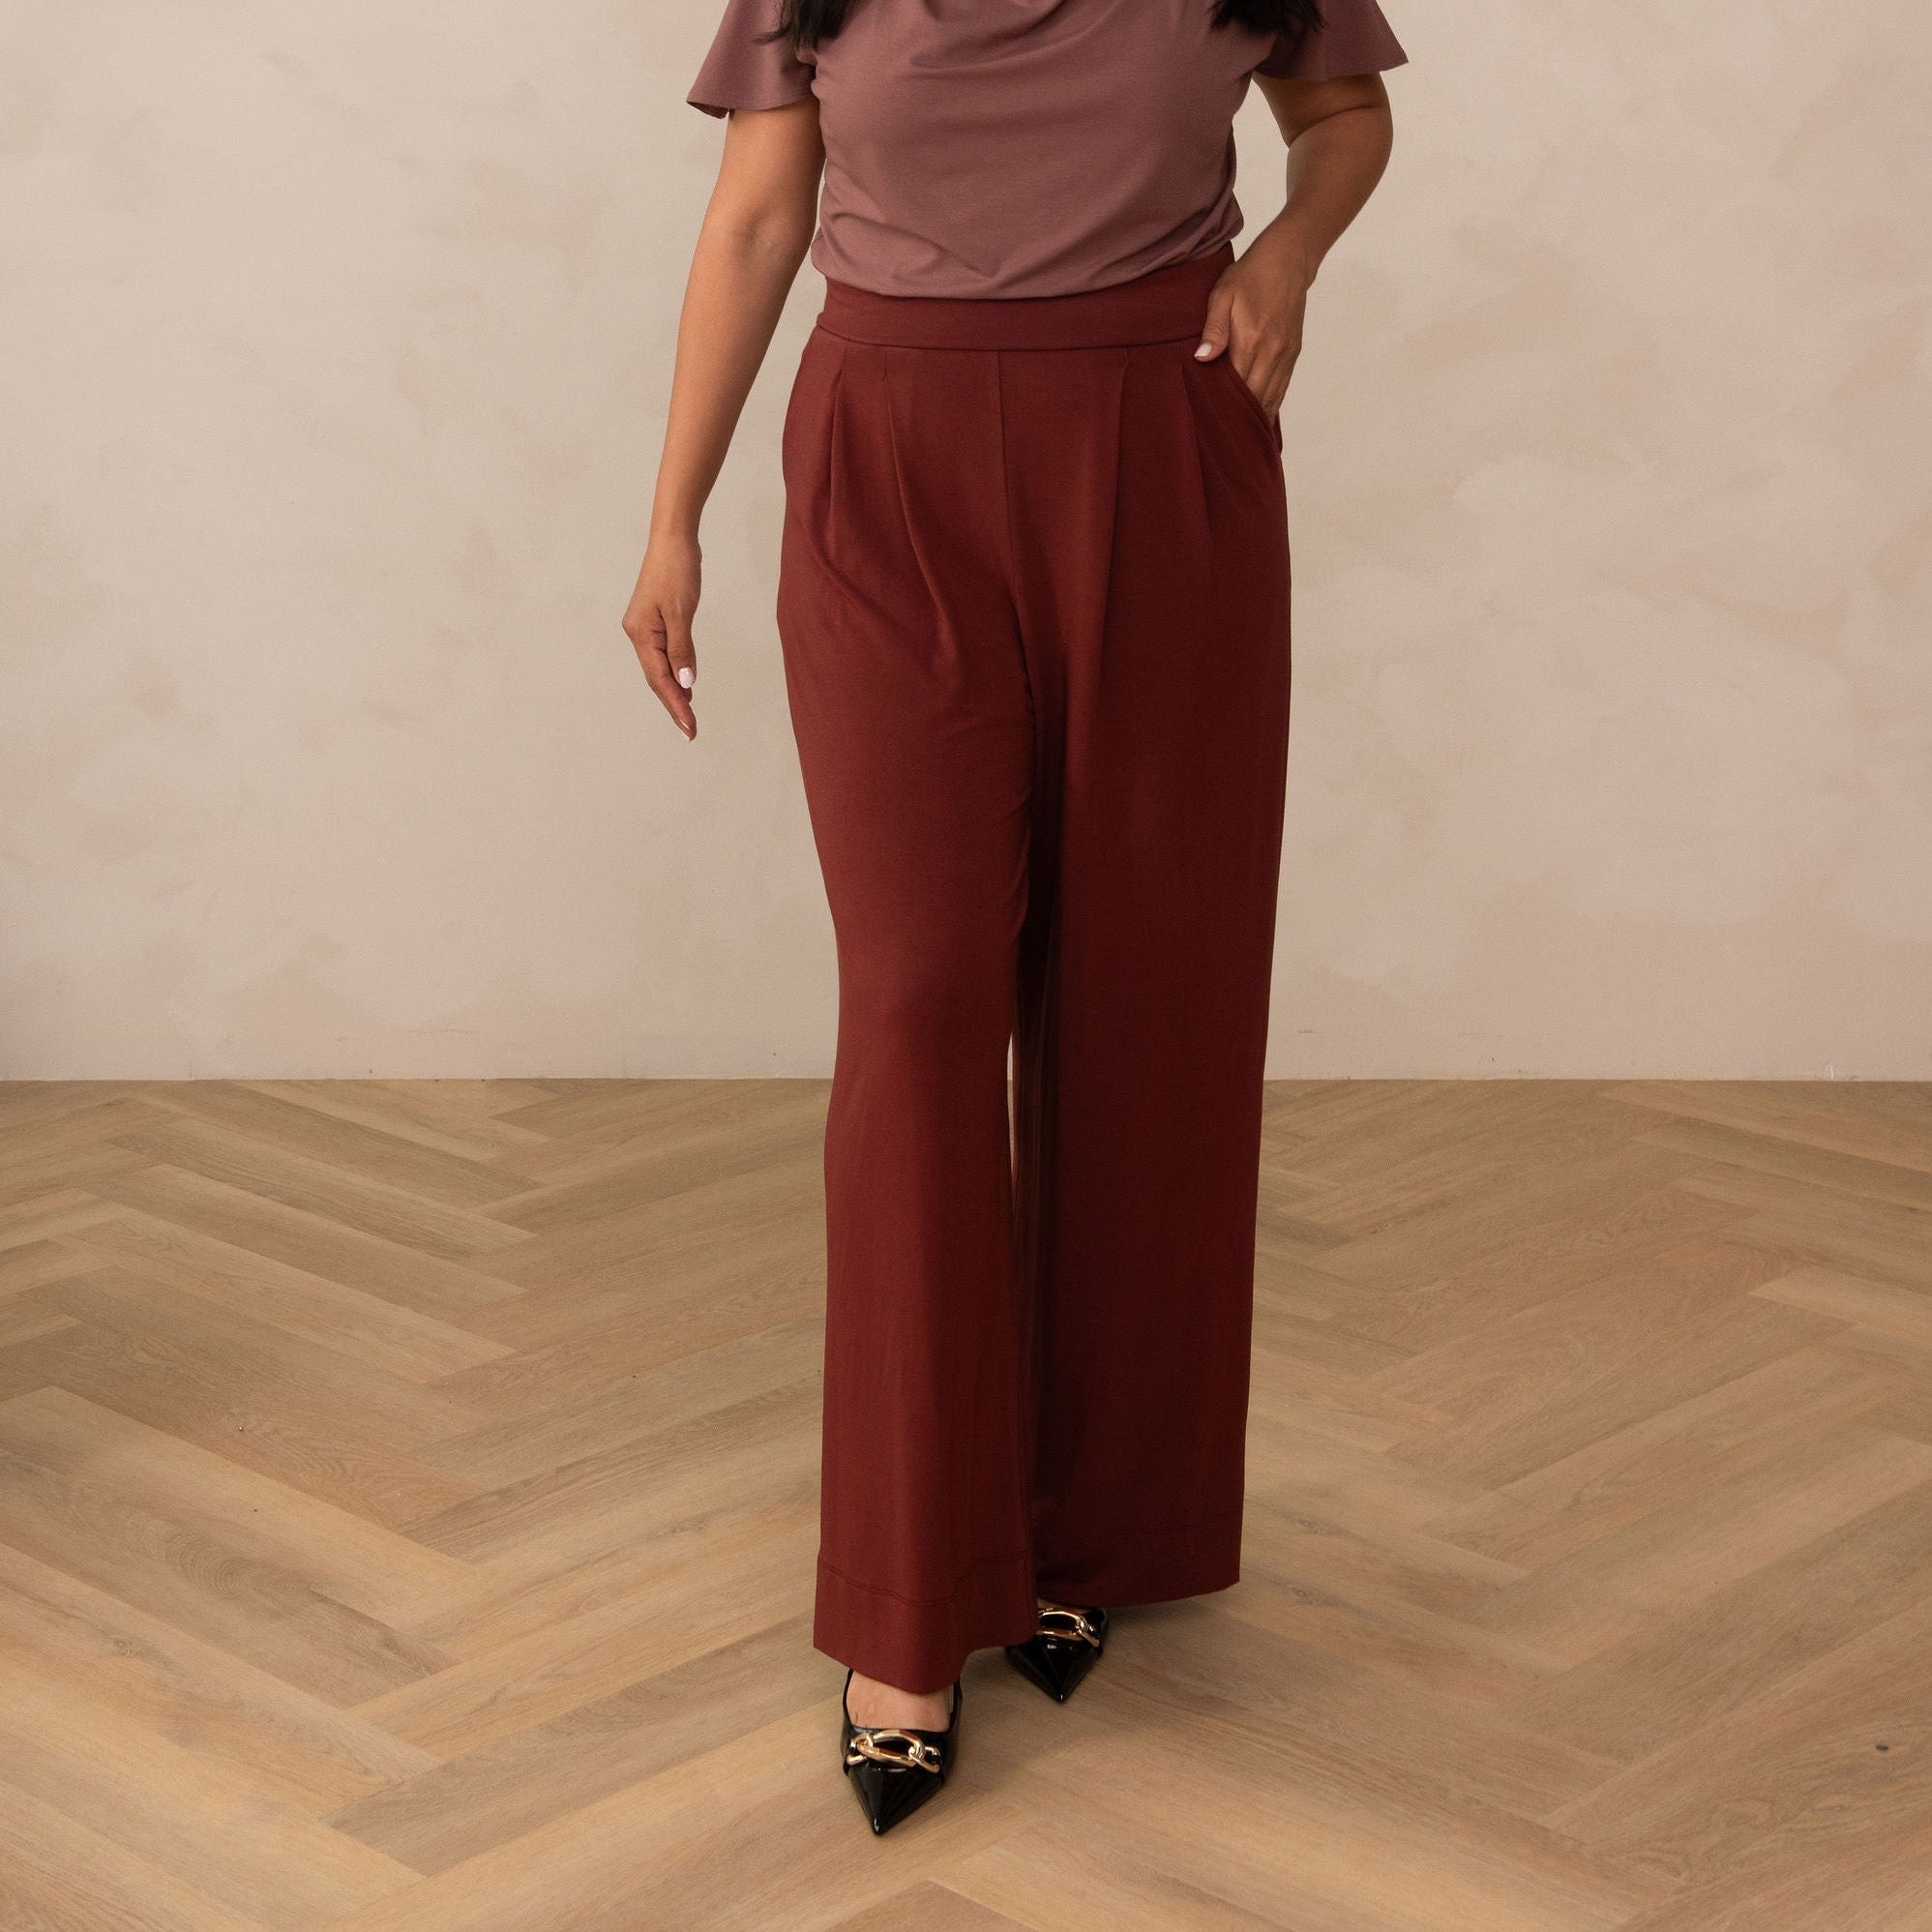 Buy Gray Palazzo Pant Cotton for Best Price, Reviews, Free Shipping